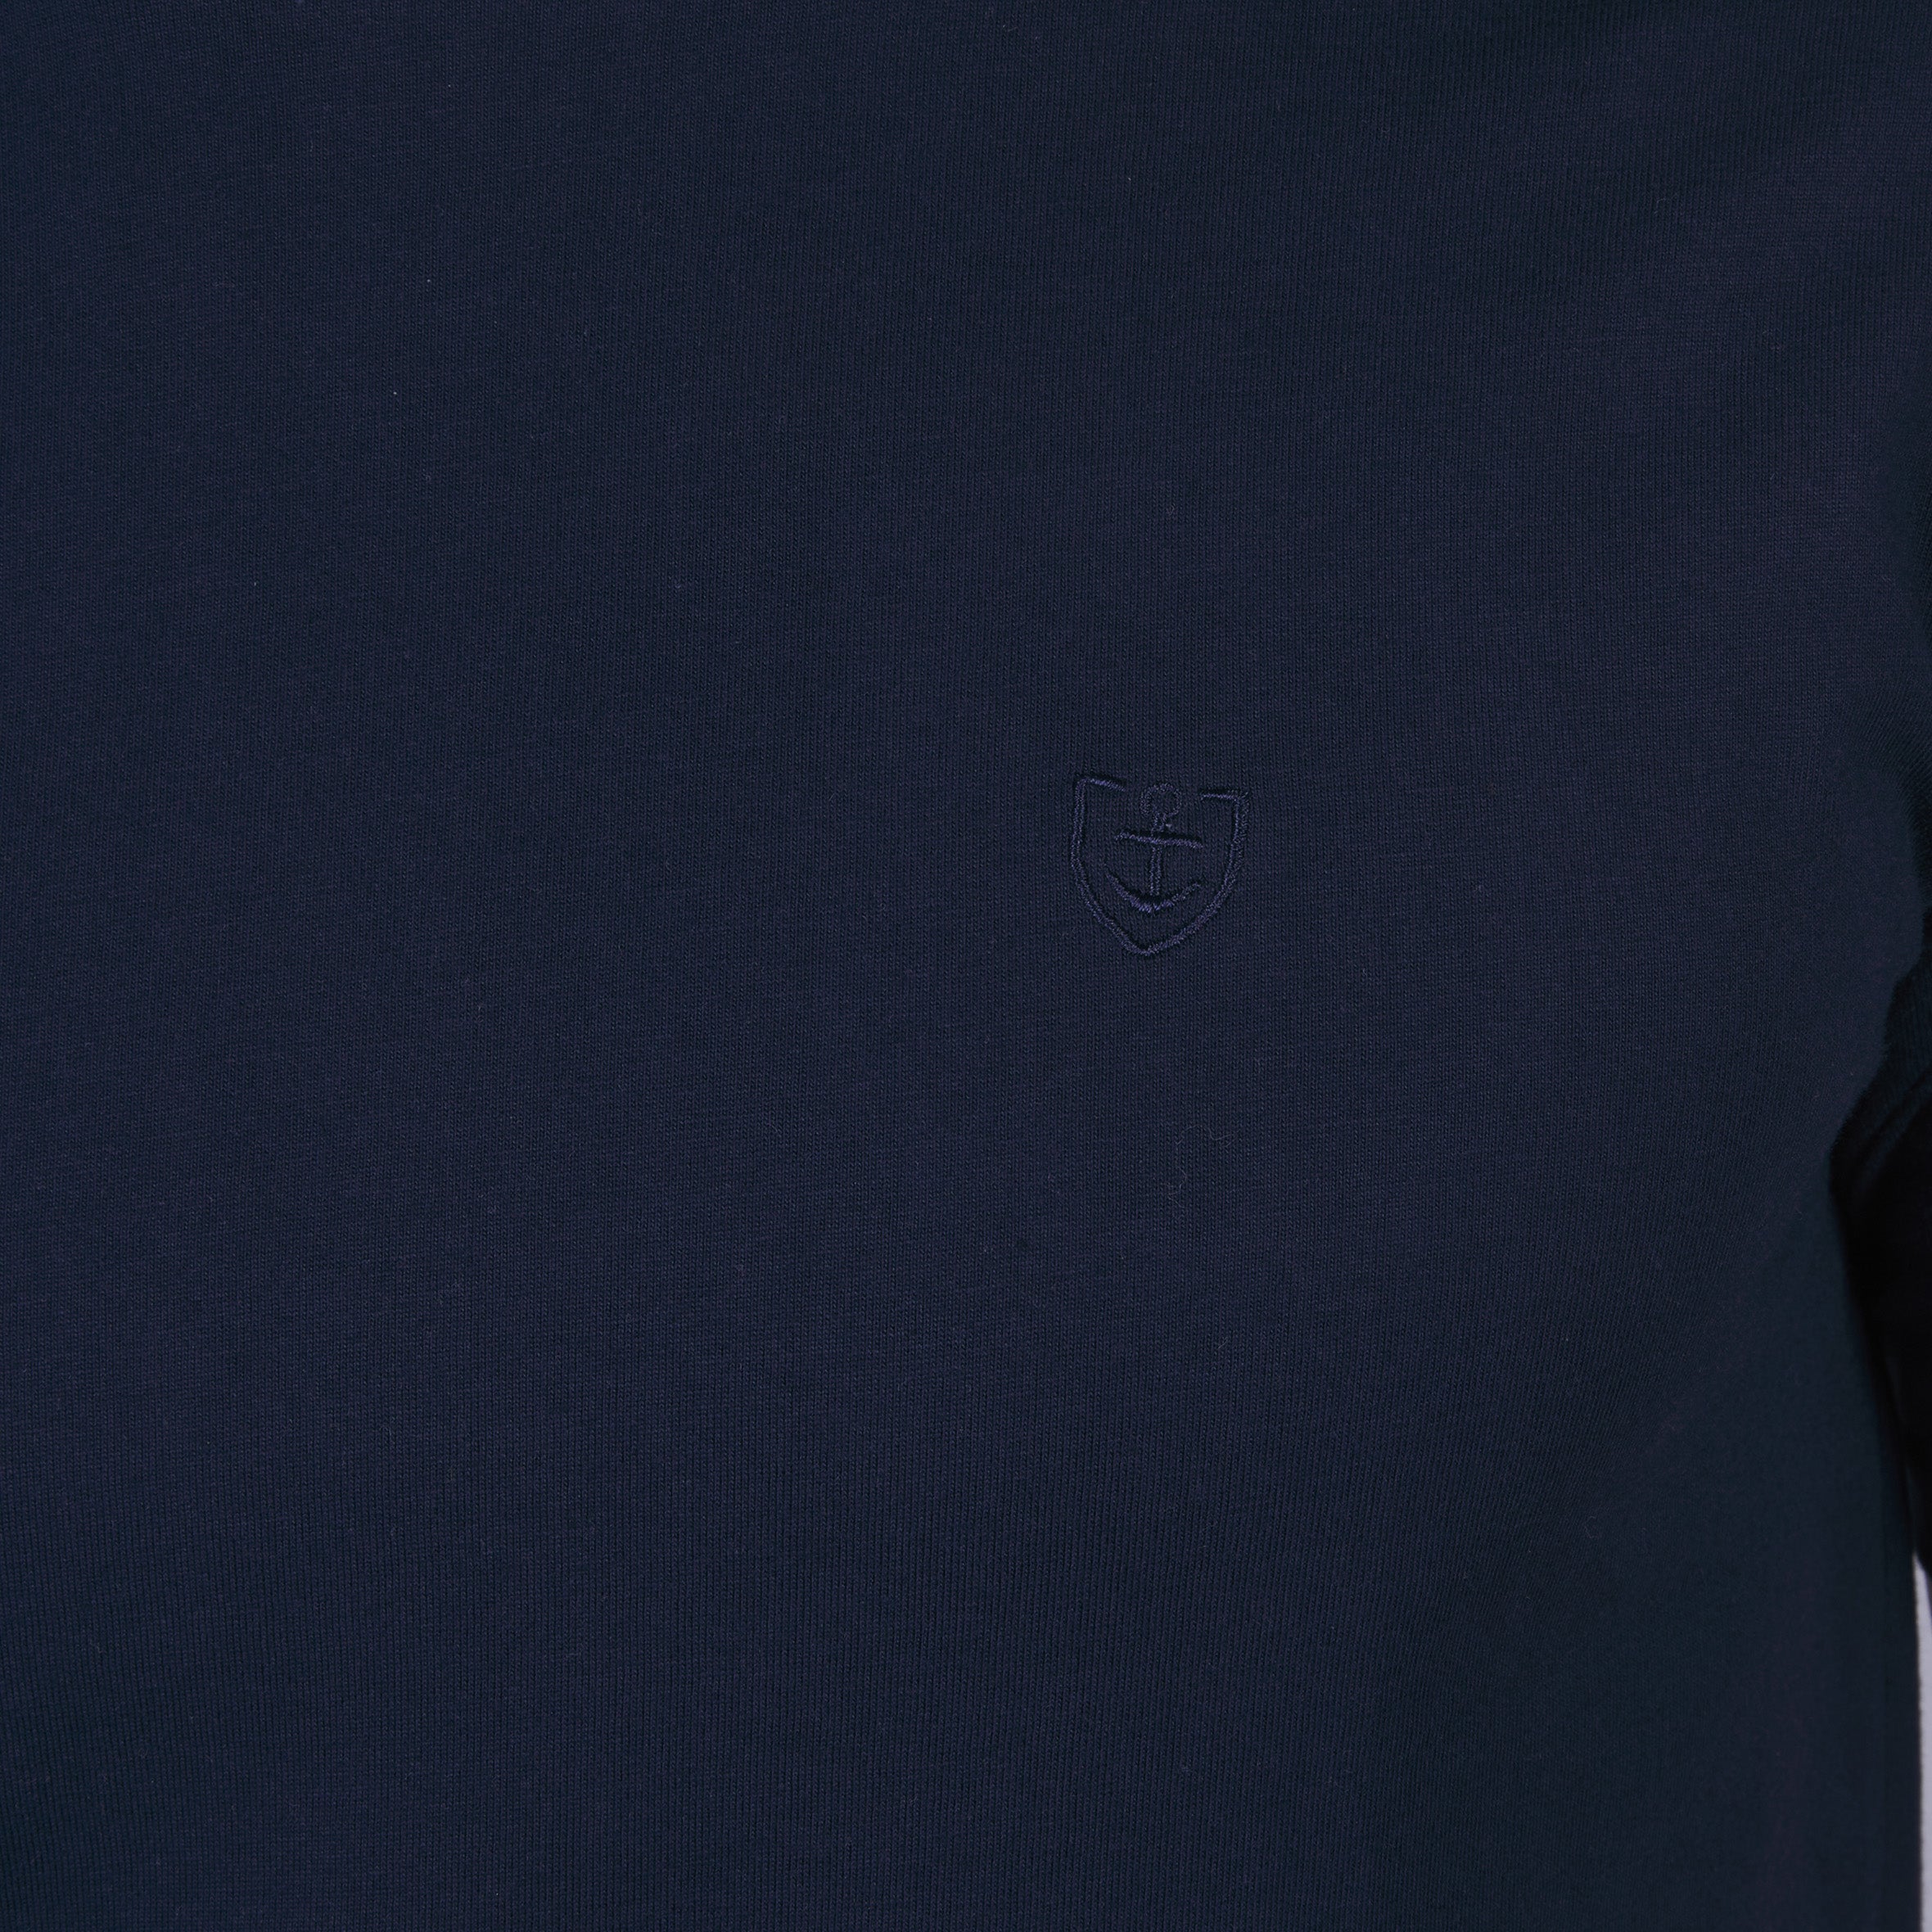 T-shirt in Pure Combed Cotton Jersey NAVY BLUE